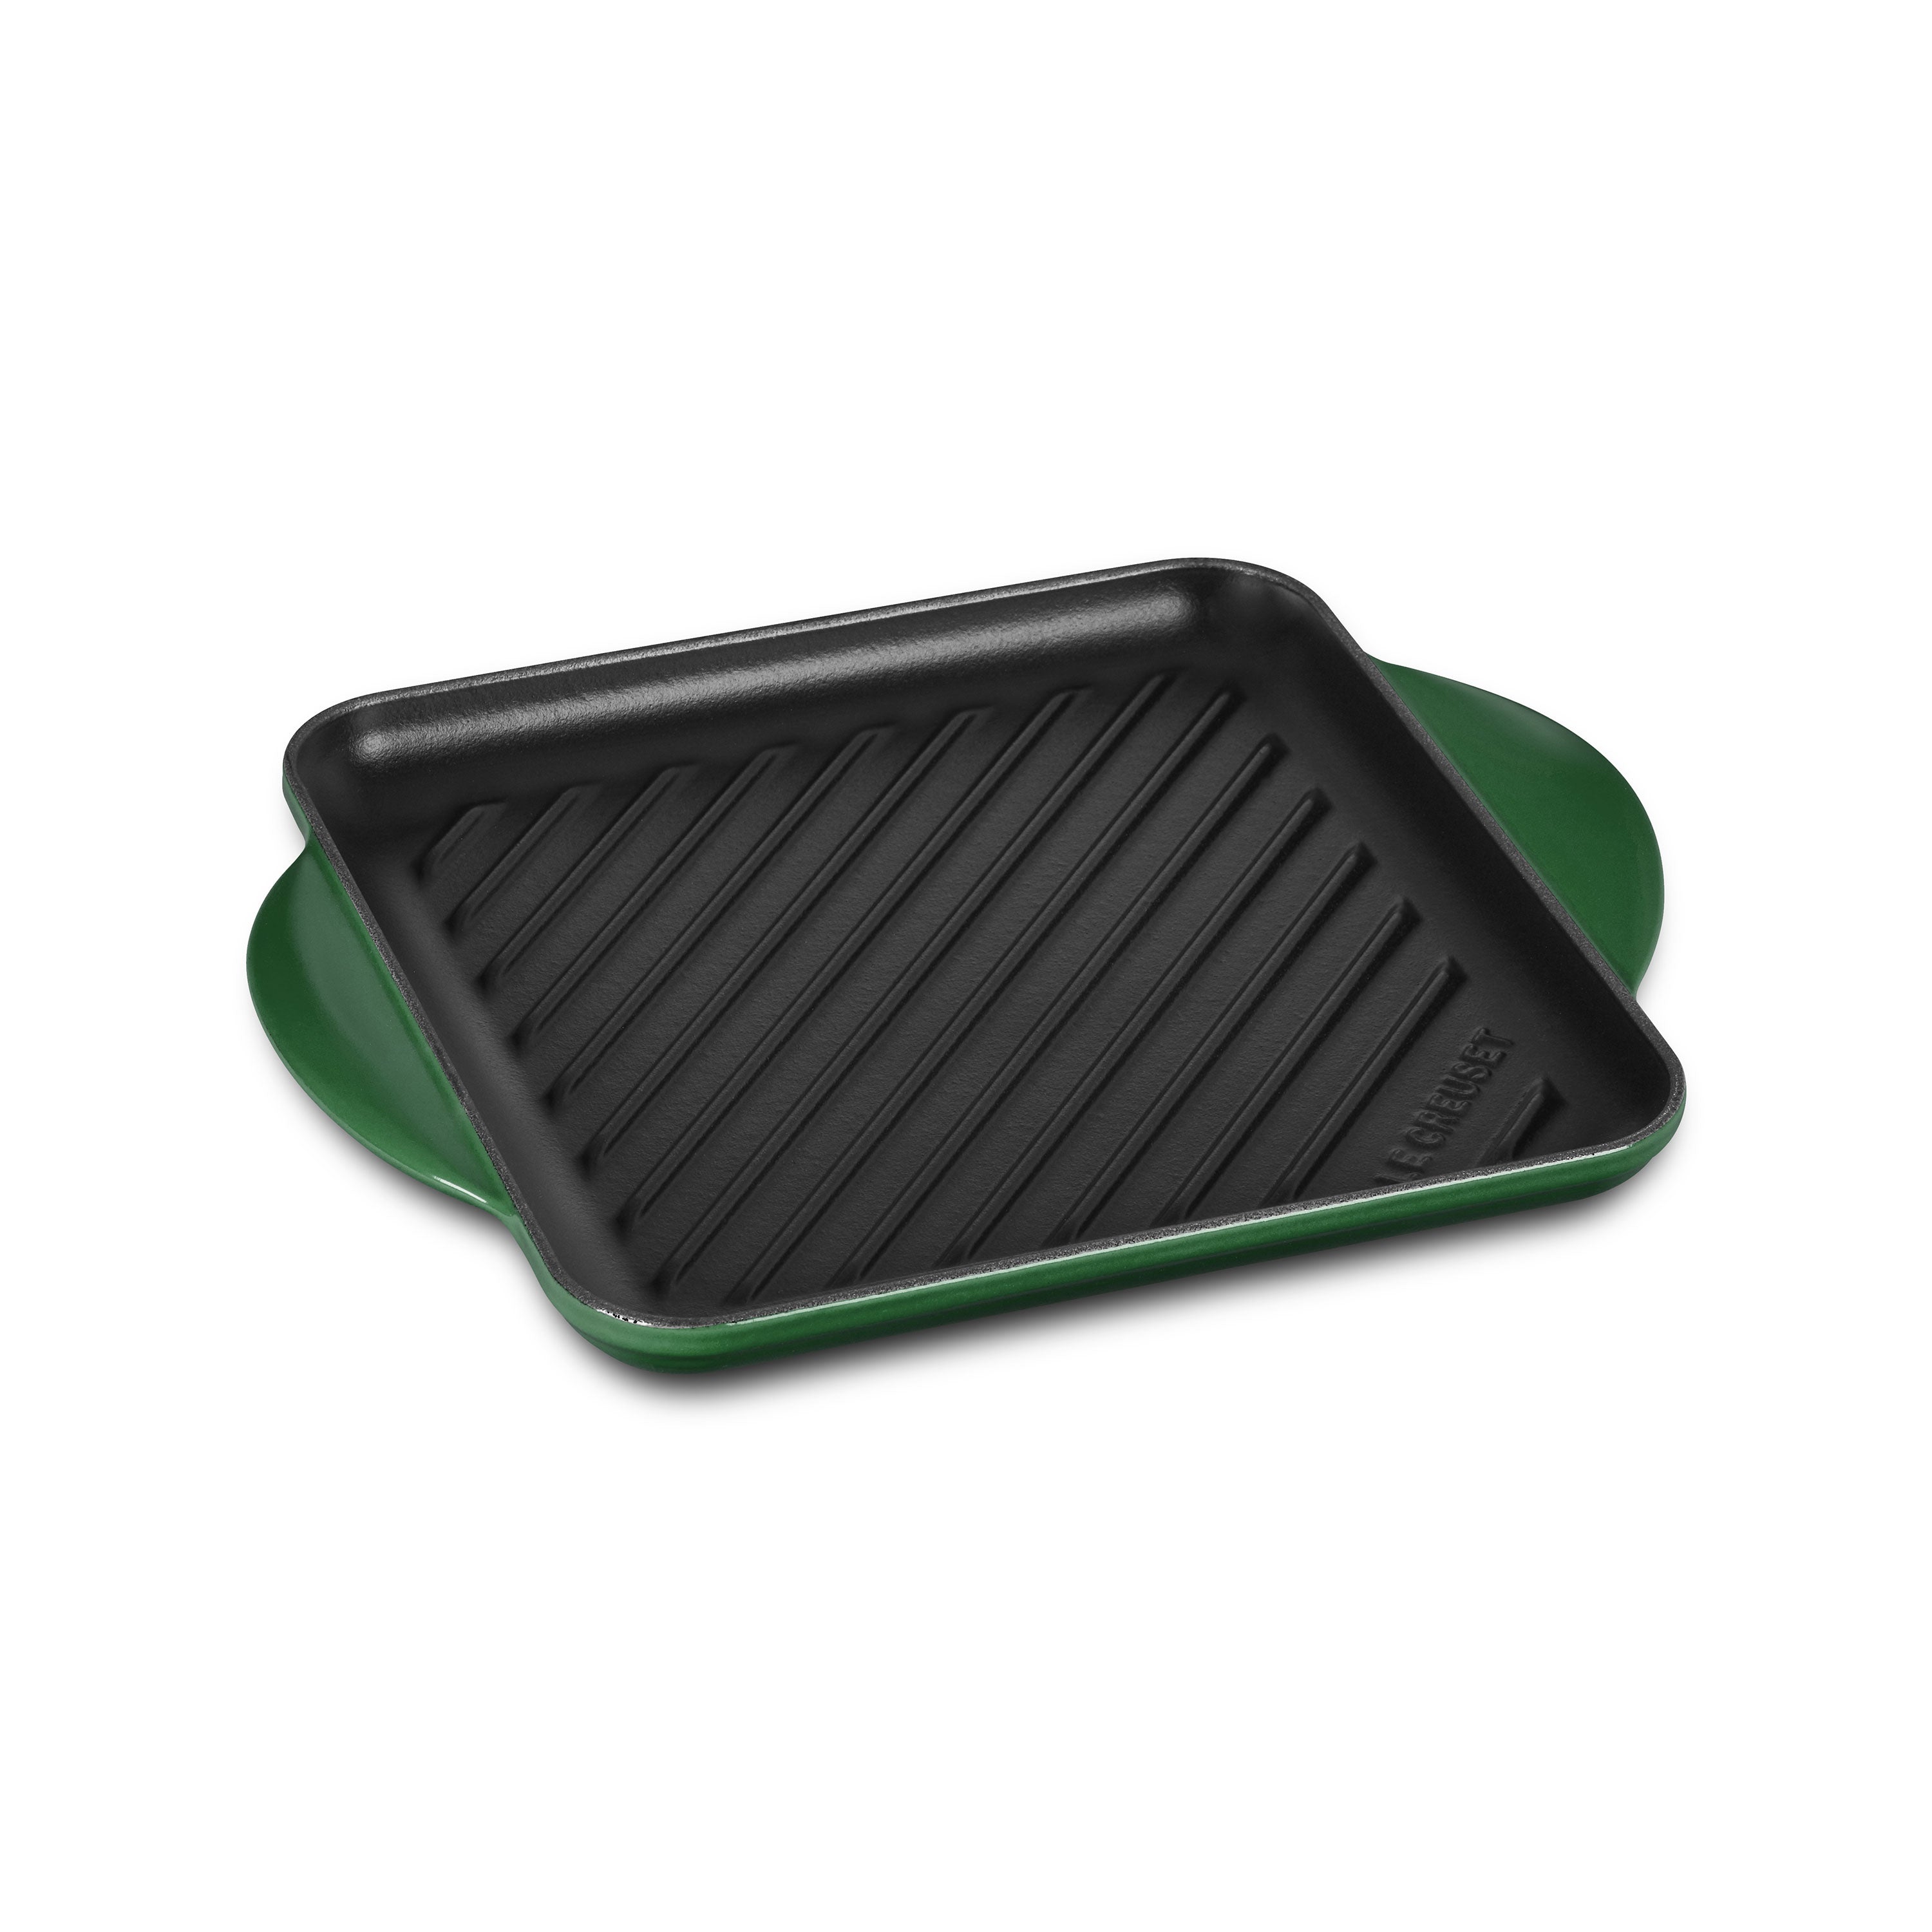 Grill pan  Grill pan, Grilling, Le creuset griddle pan